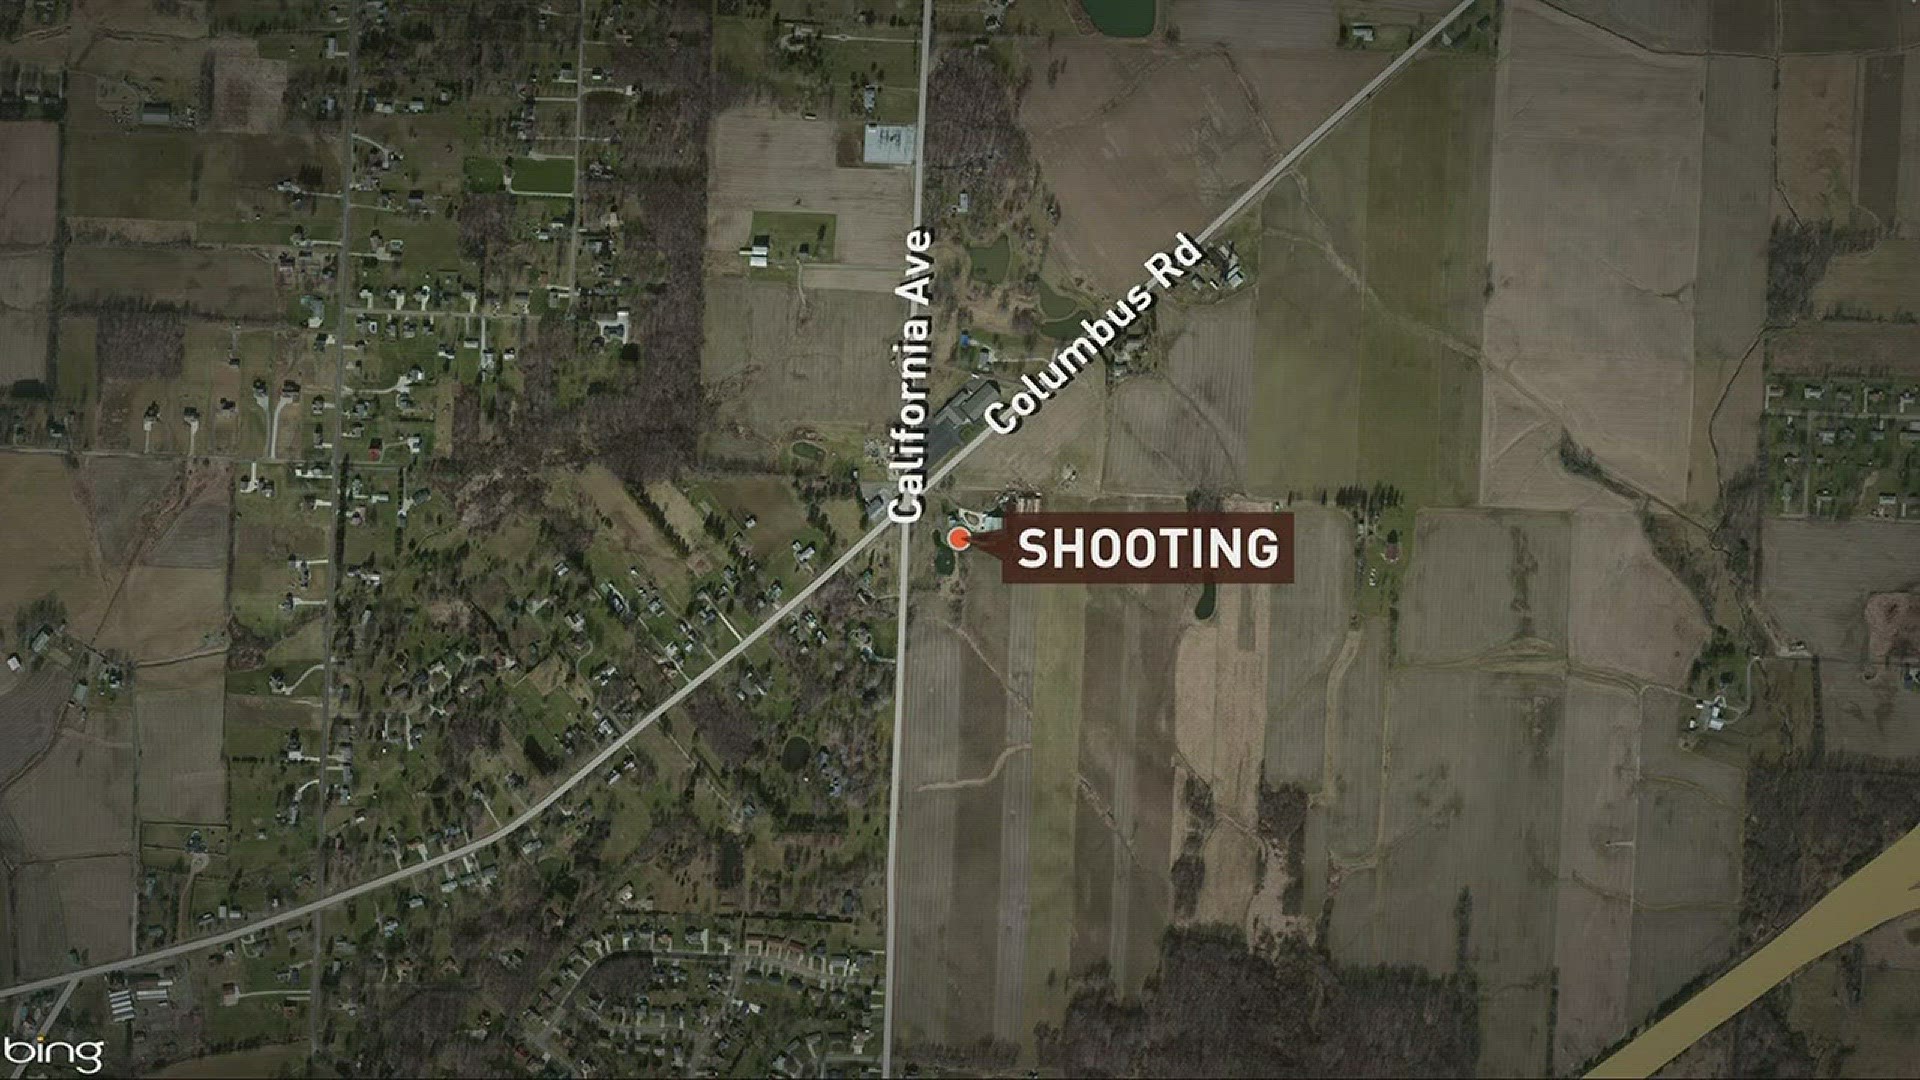 The Stark County Sheriff reports a woman dies trying to put her gun away during target practice.